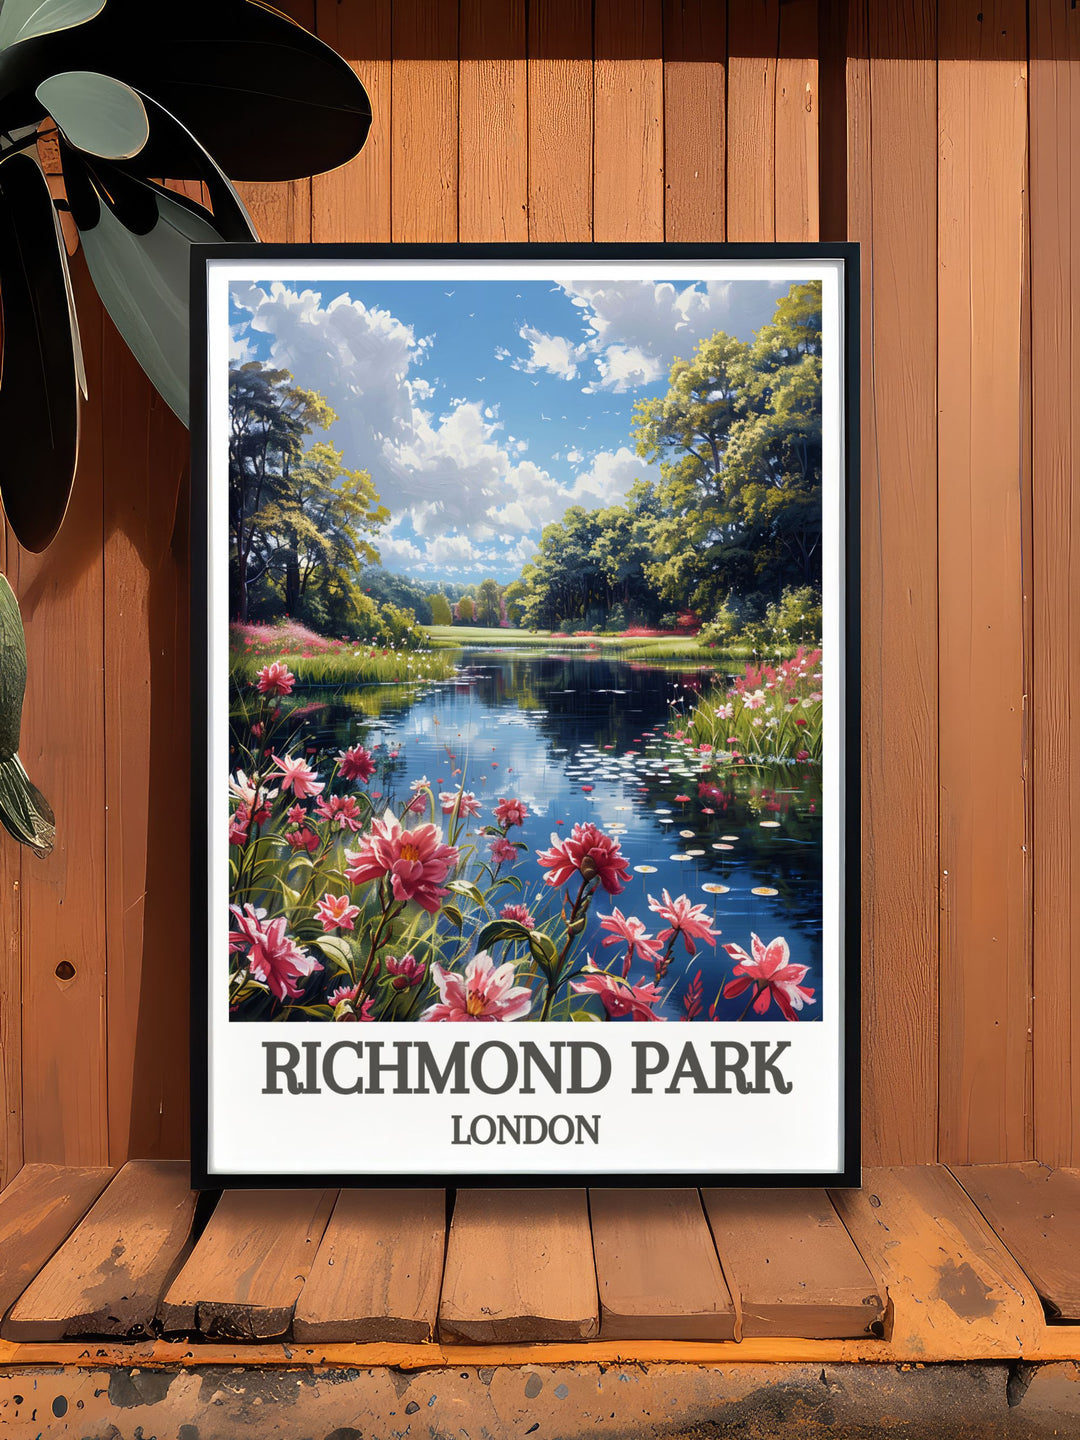 Experience the charm of Isabella Plantation with our Home Decor collection, showcasing vibrant flowers and peaceful ponds in Richmond Park.